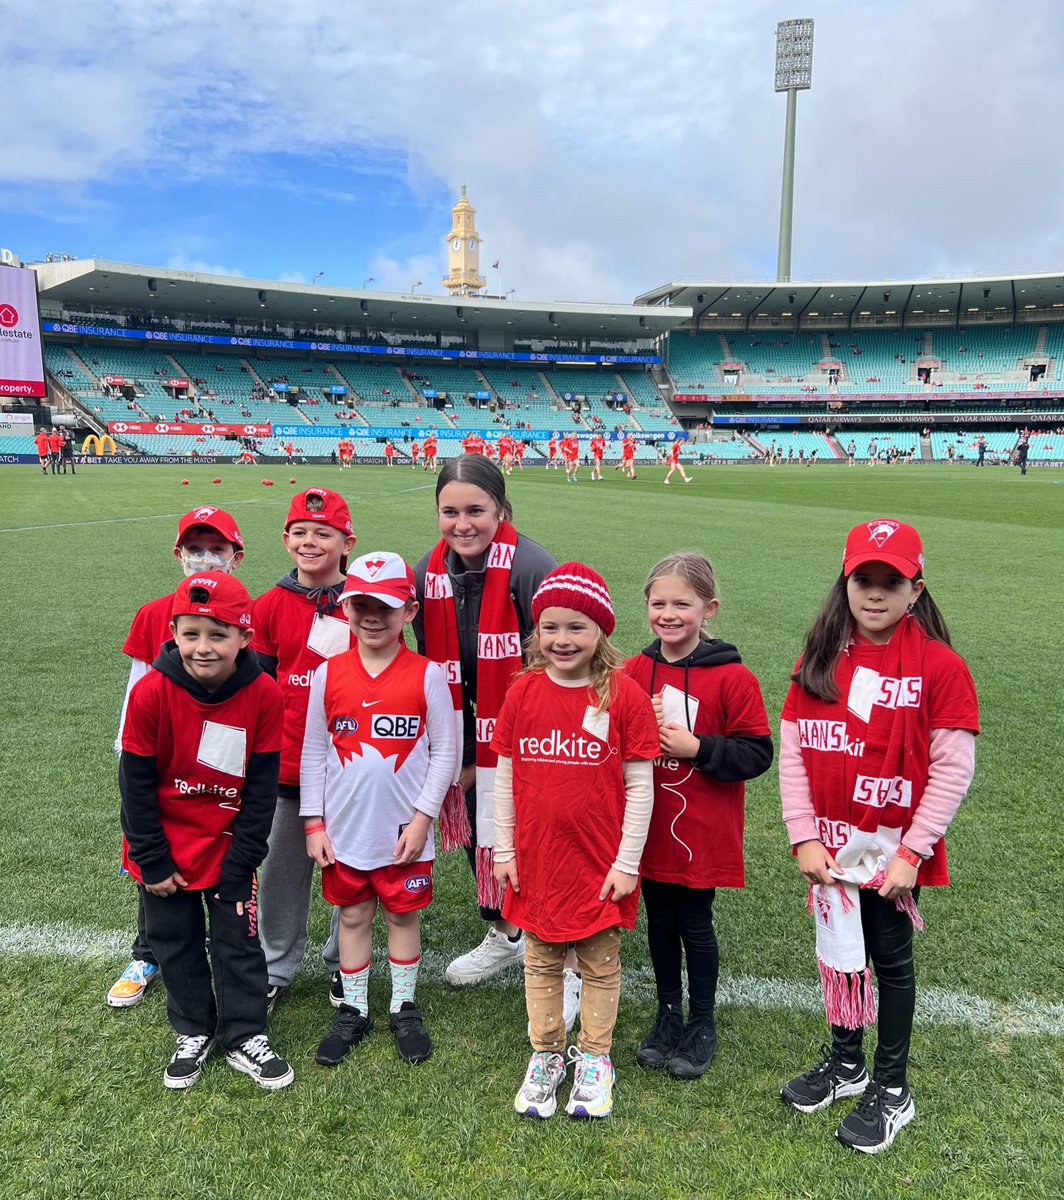 Some of our @Redkite families at Swans Red Day with @SydneySwansAFLW player Jaide Anthony❤️ Donate $20 or more for the chance to win return economy airfares to Europe thanks to @qatarairways : bit.ly/3yVLIXH